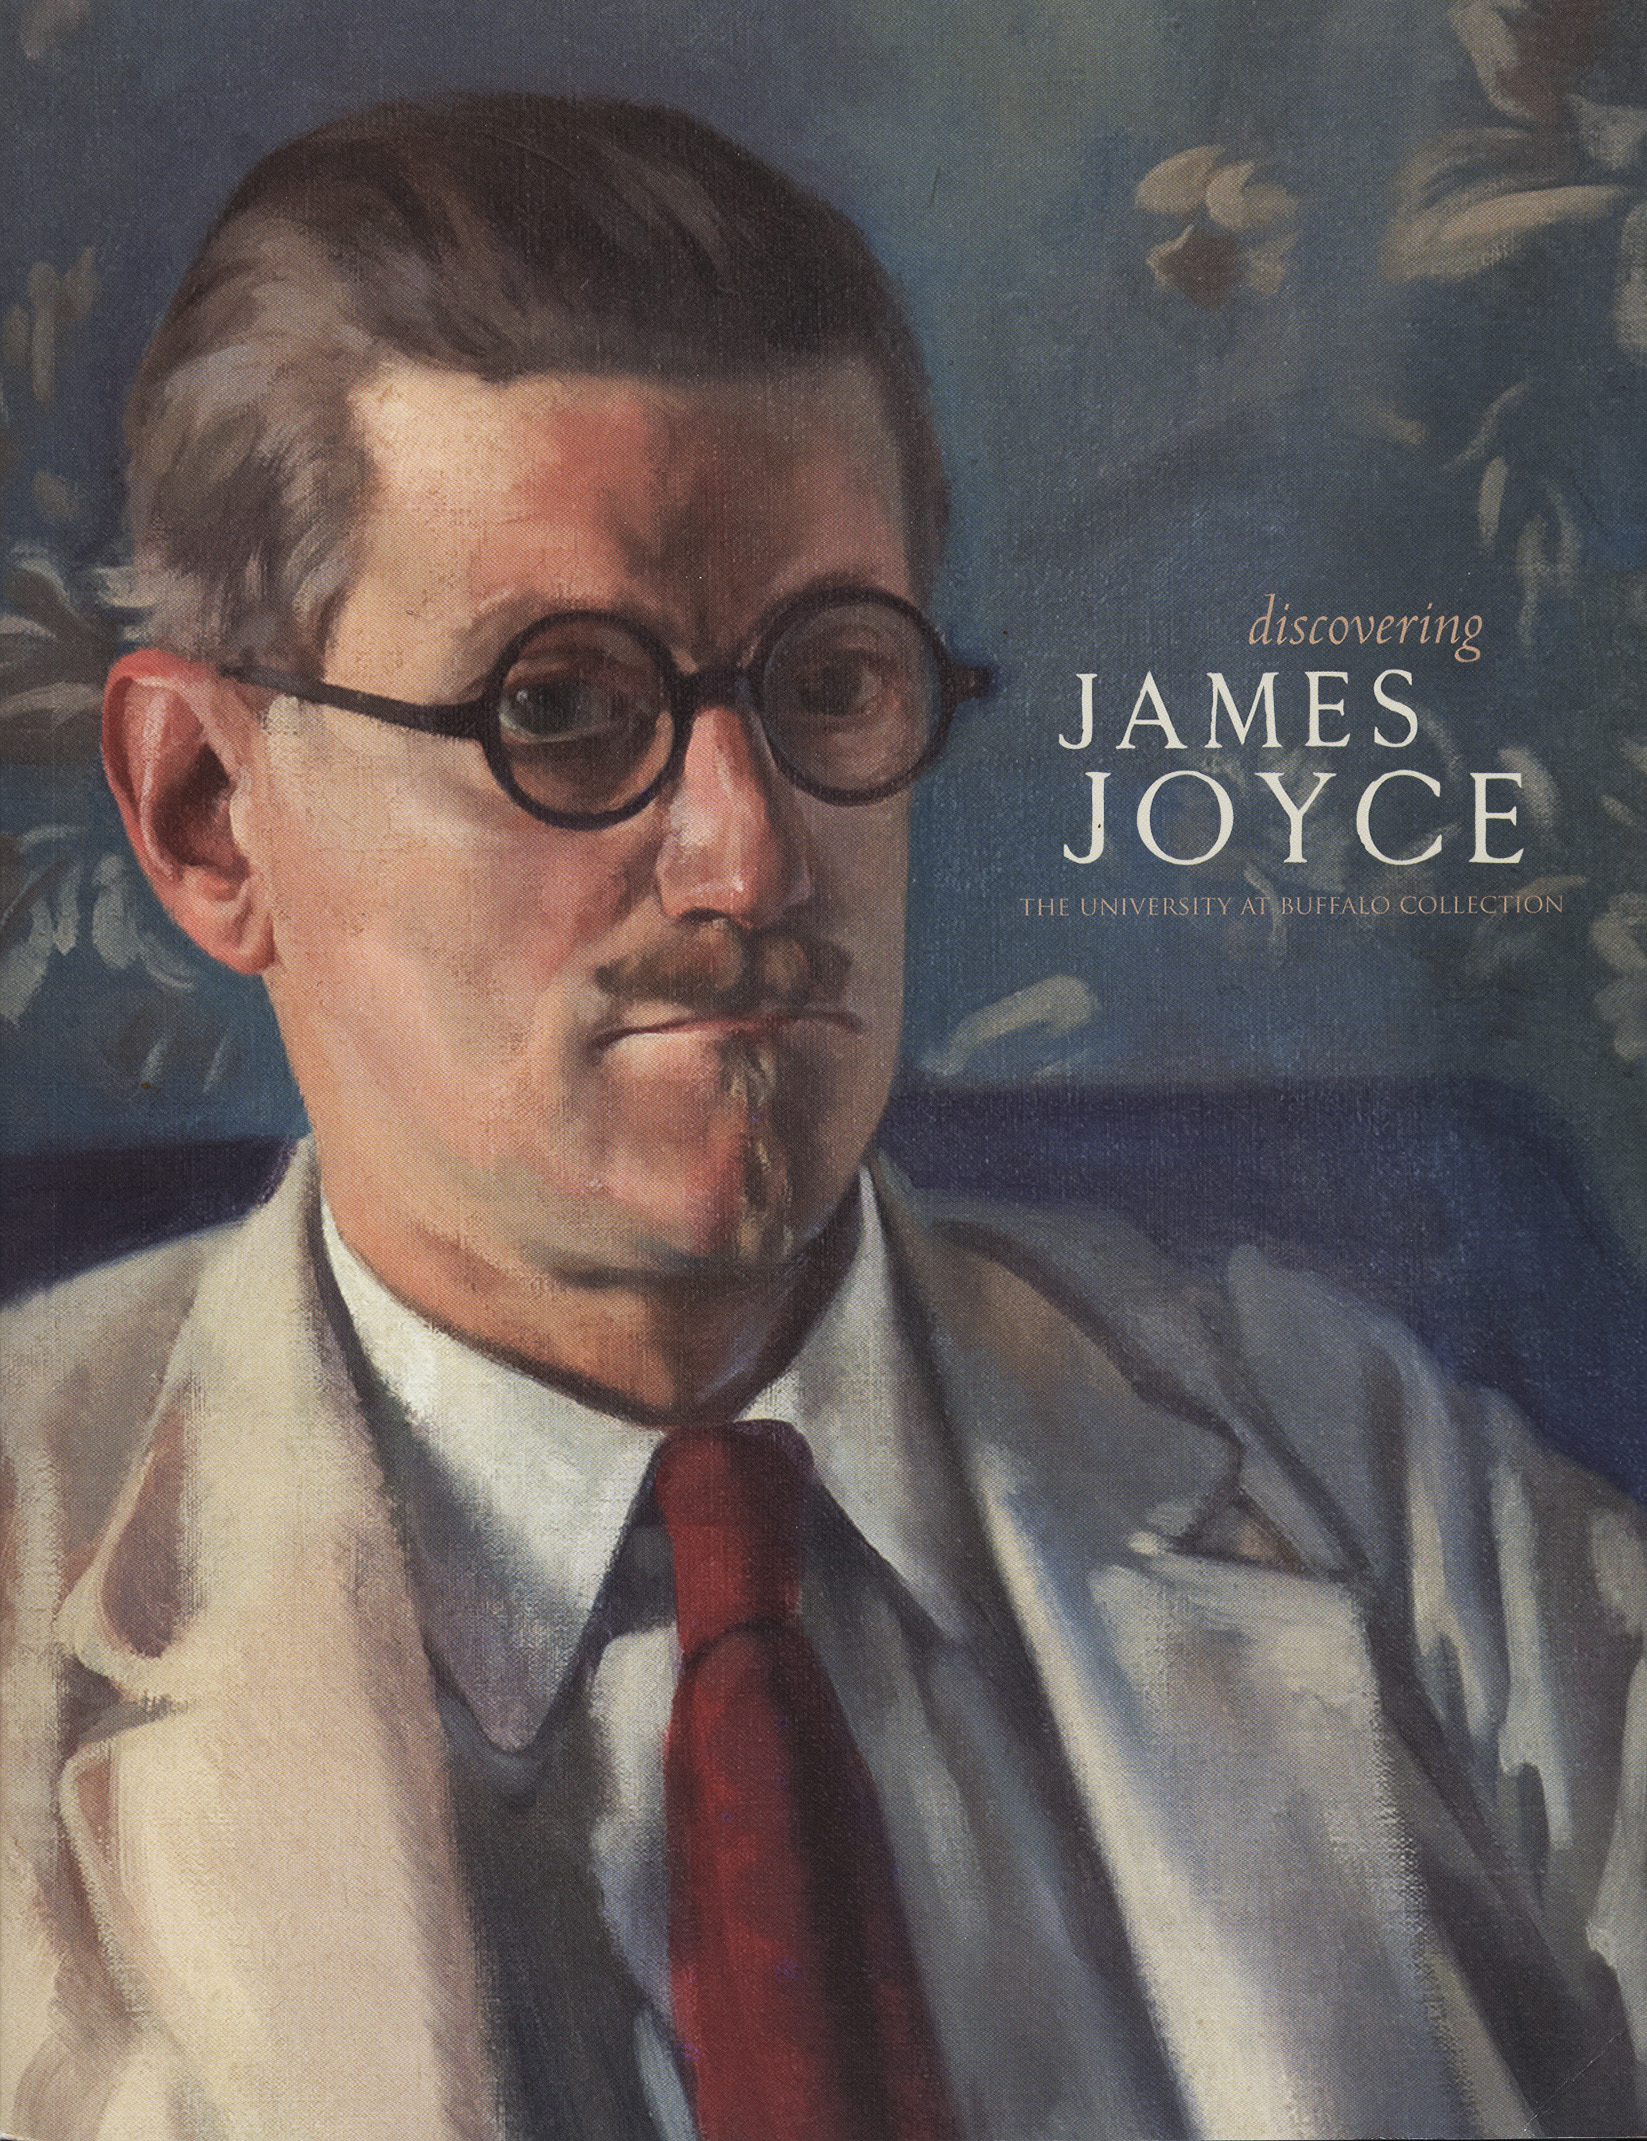 doctoral thesis on james joyce